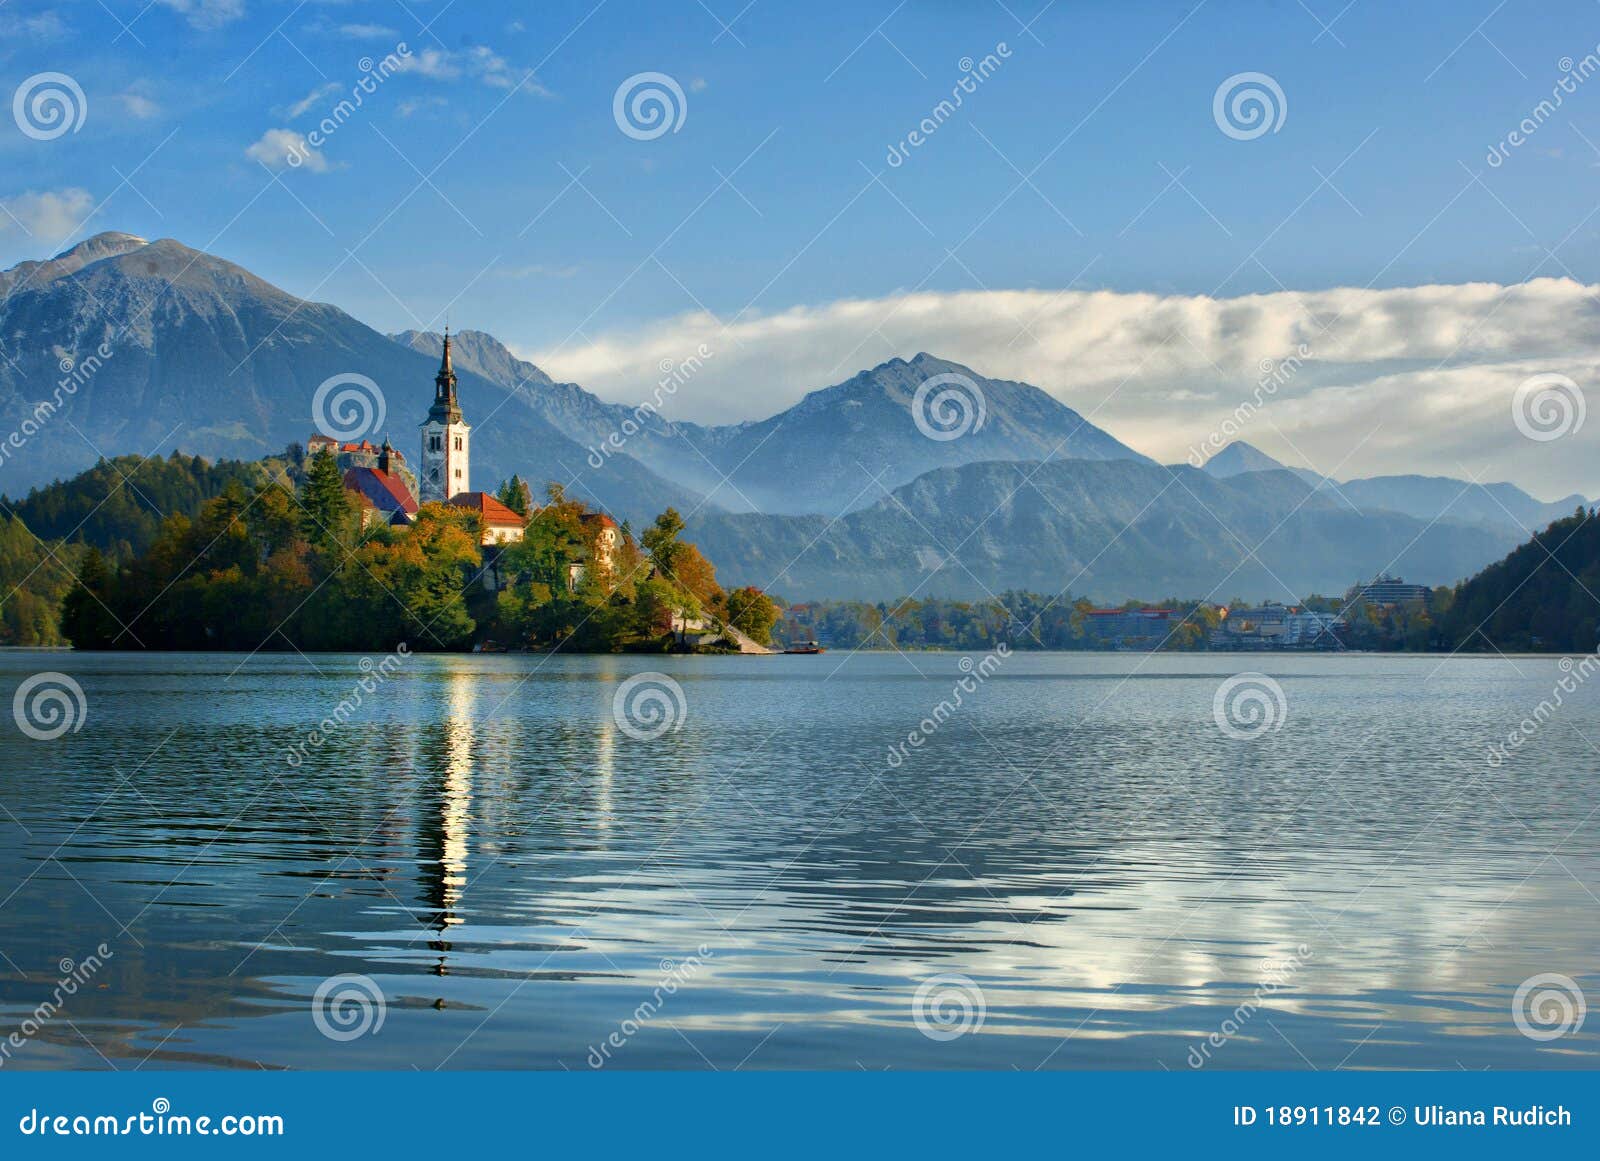 church on the island of lake bled